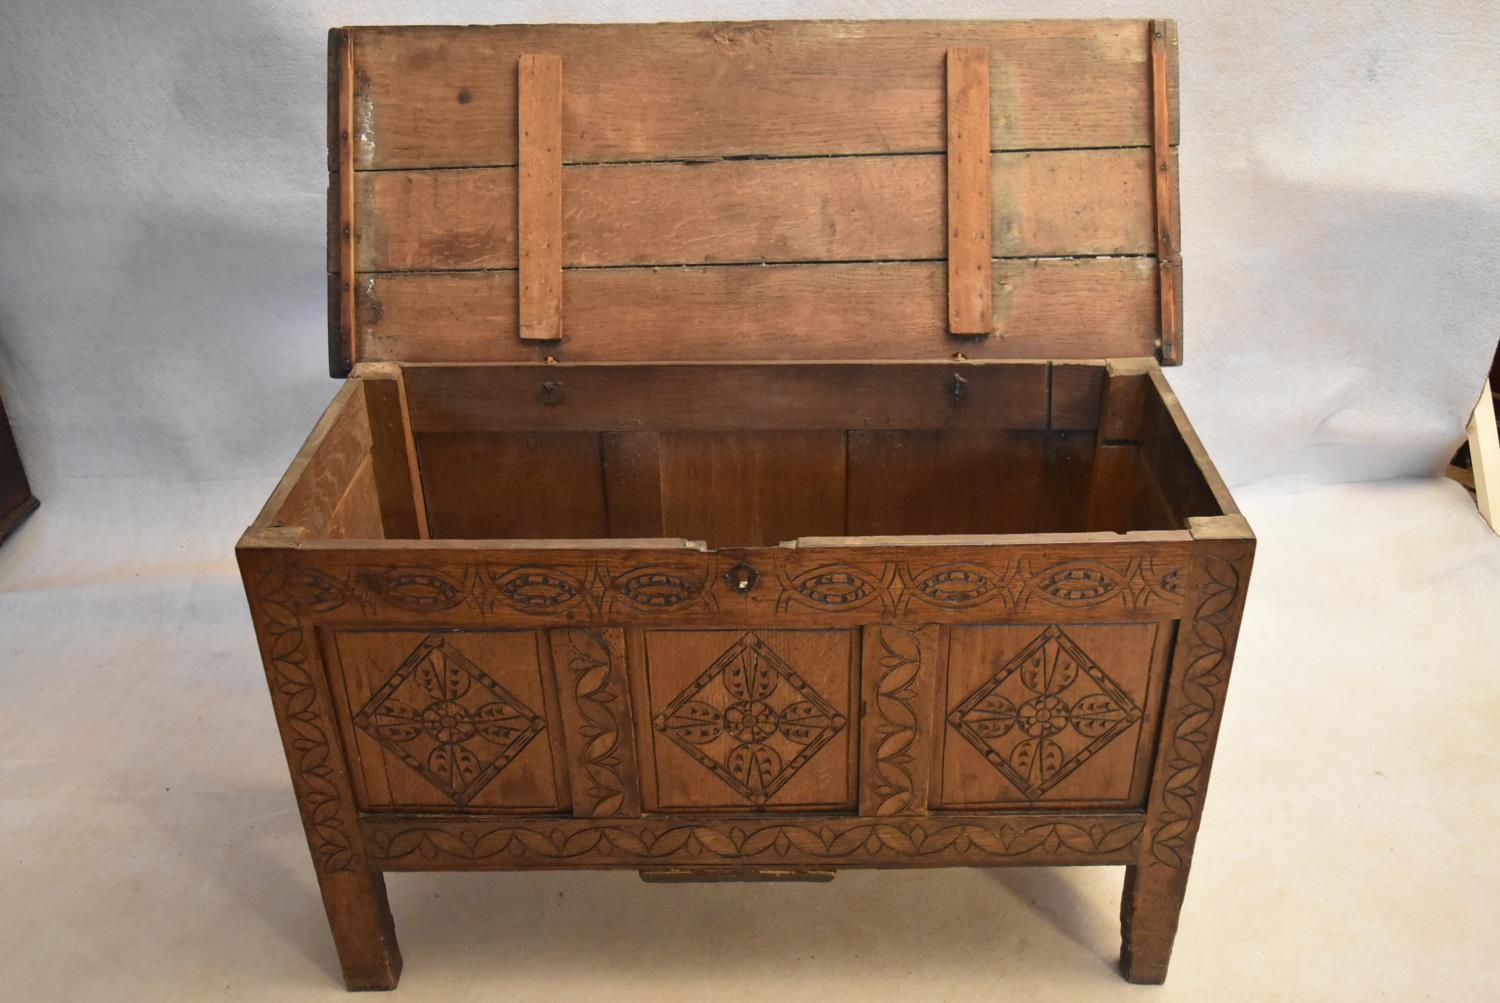 An 18th century country oak coffer with its original hinges and lozenge carved panels raised on - Image 6 of 10